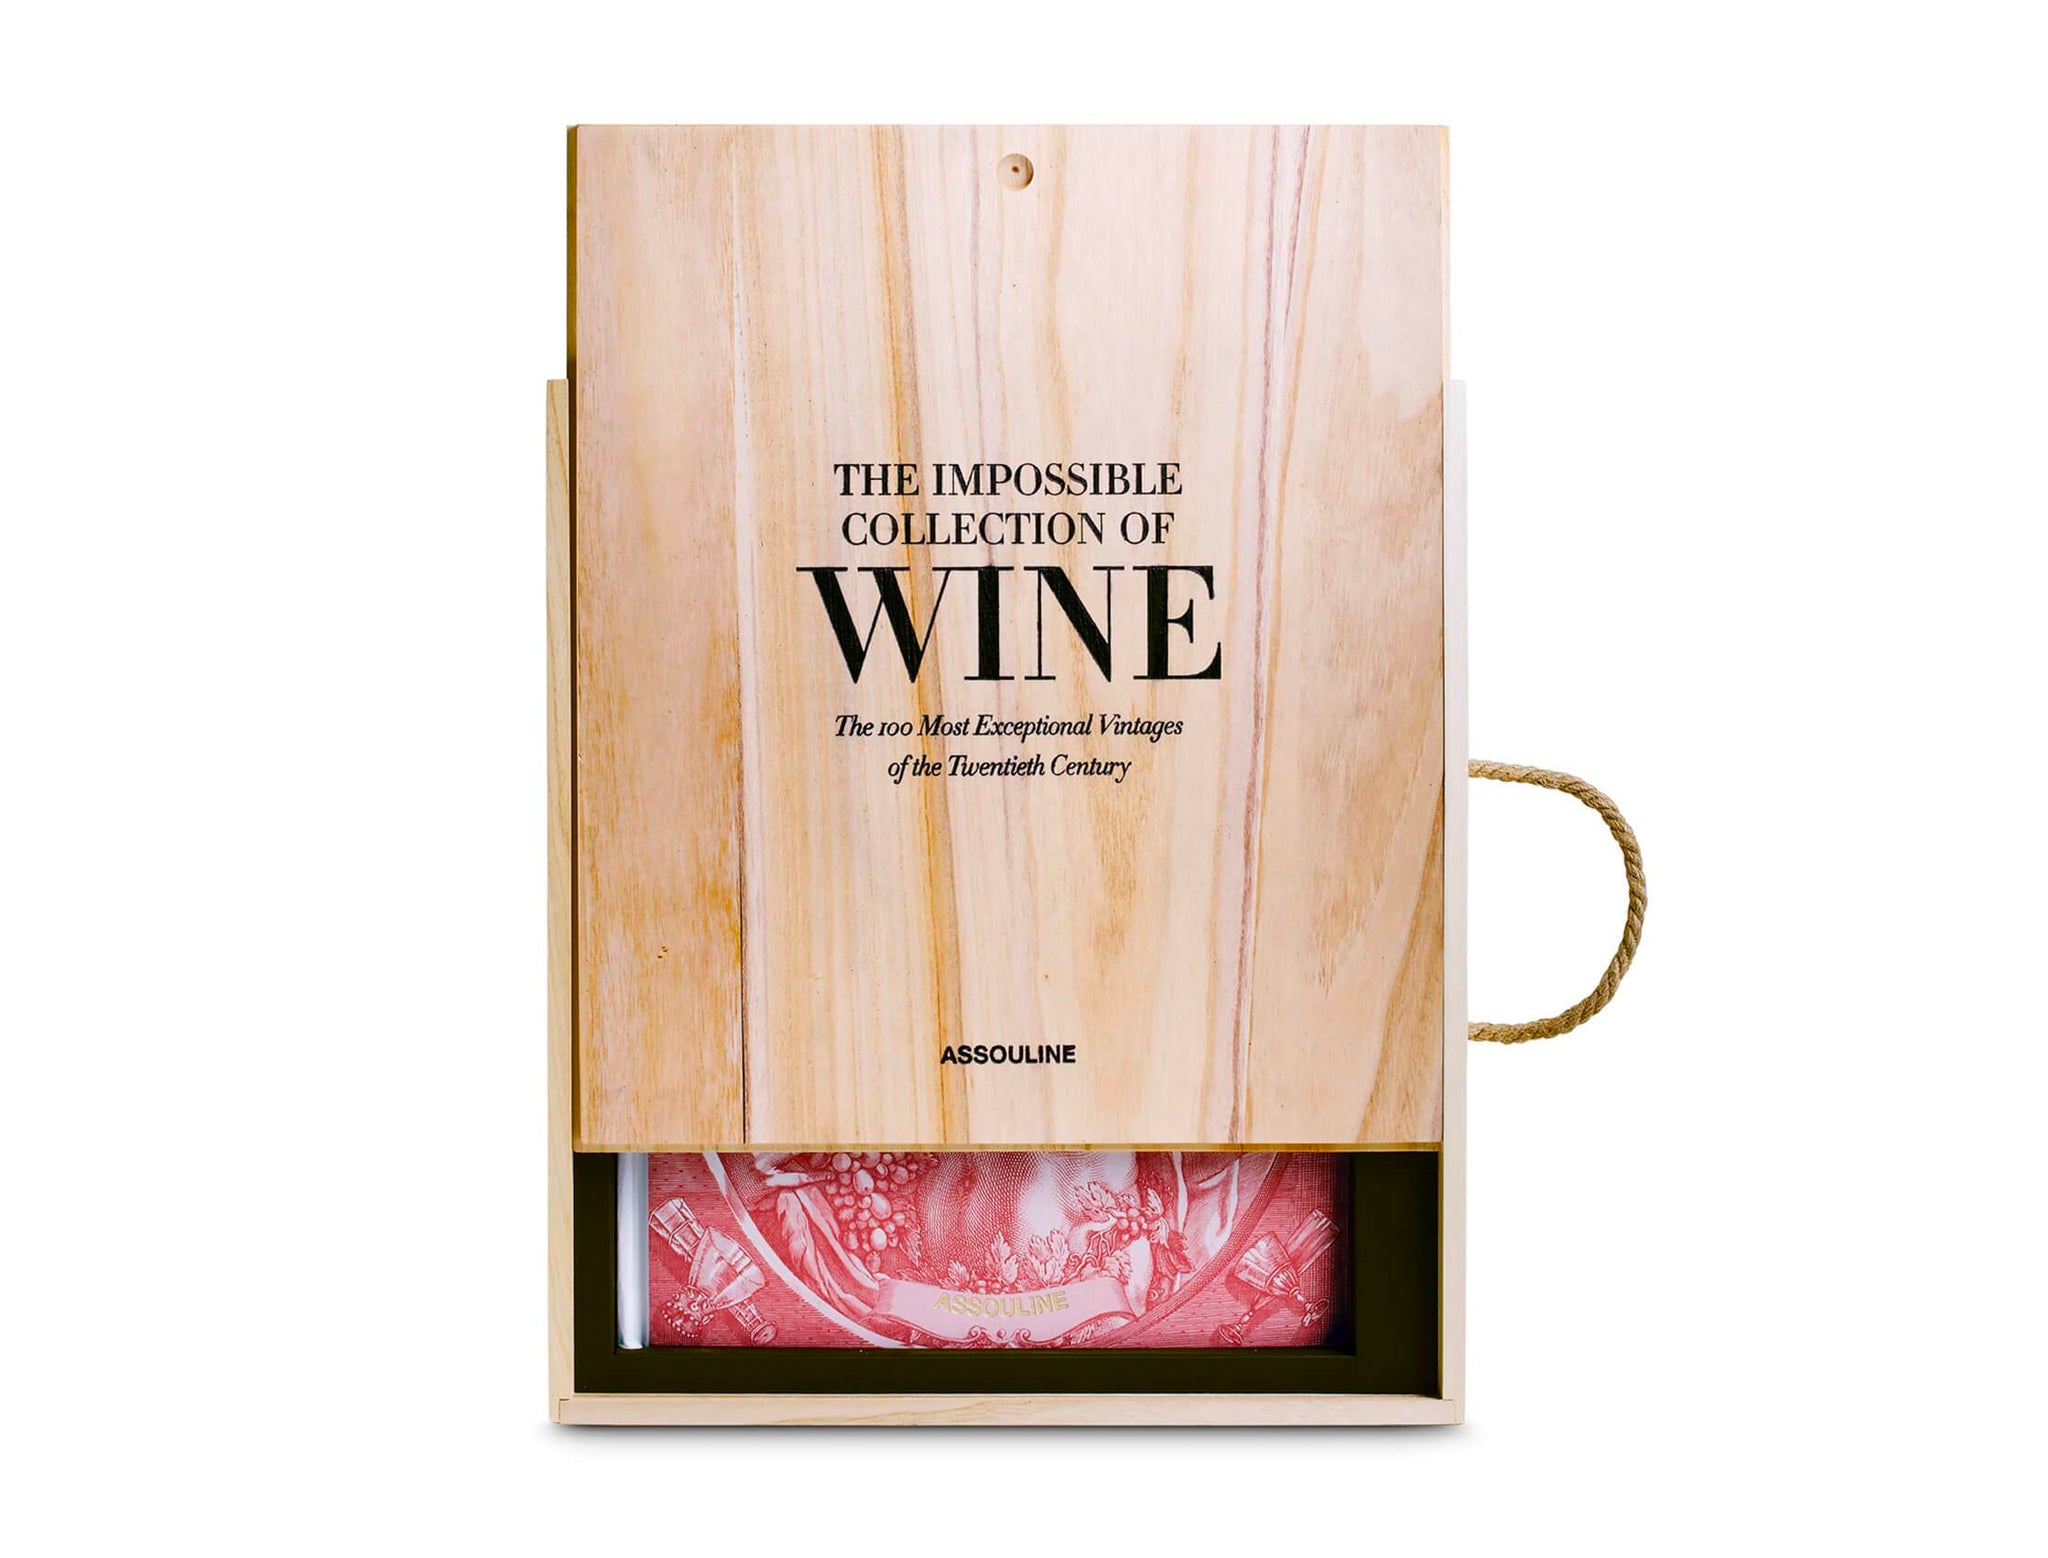 The Impossible Collection of Wine